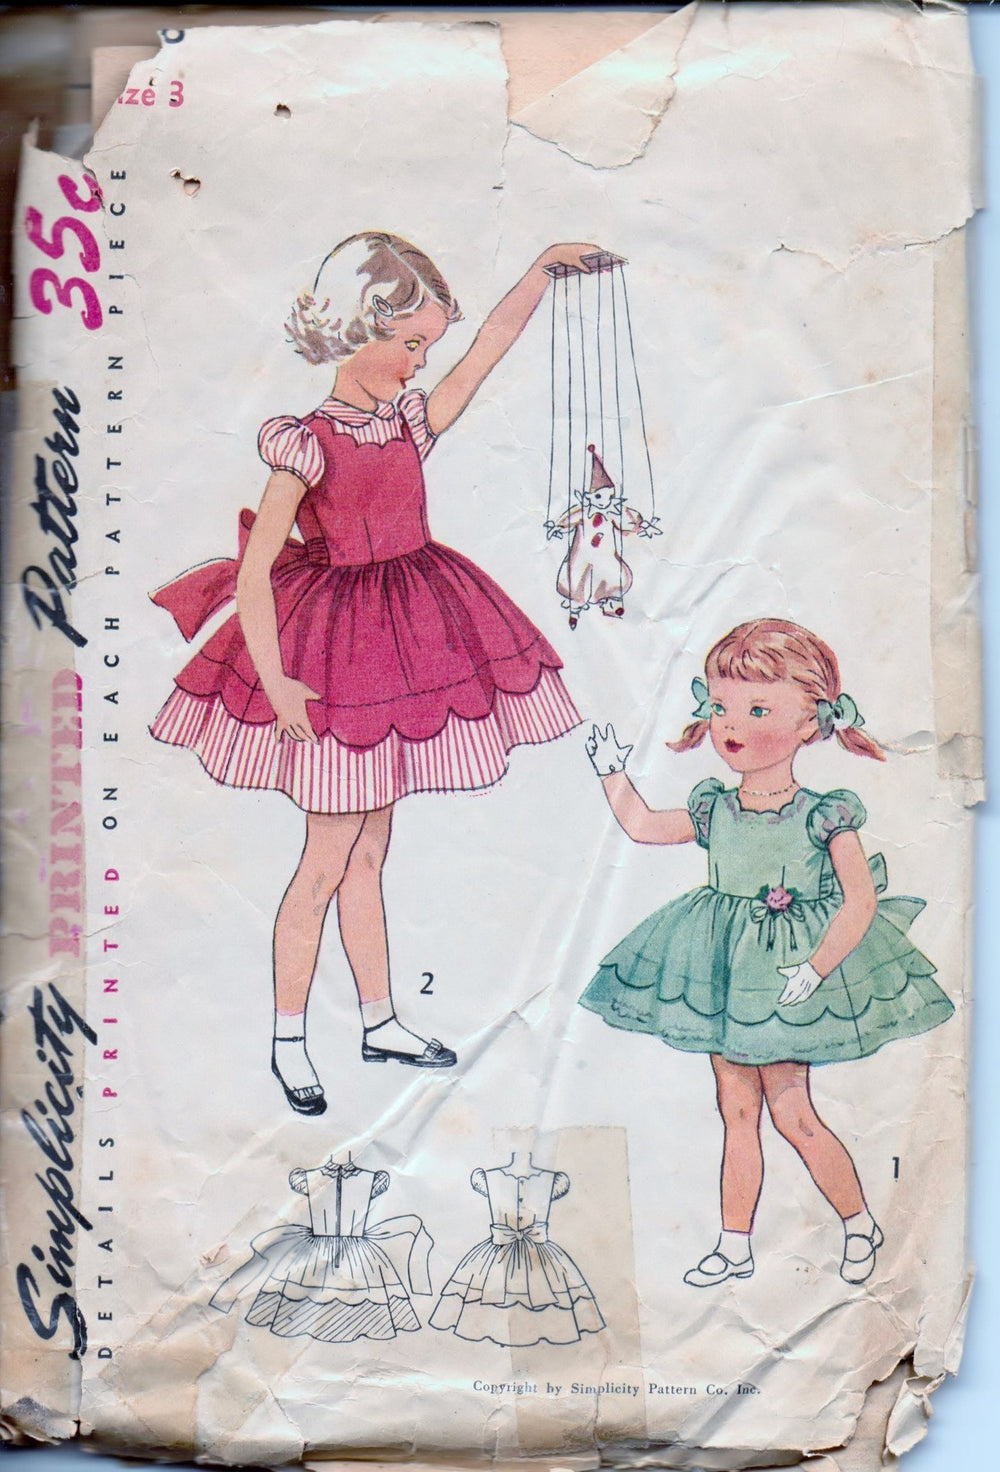 Simplicity 3808 Little Girls Toddler One-Piece Dress Vintage 1950's Sewing Pattern - VintageStitching - Vintage Sewing Patterns